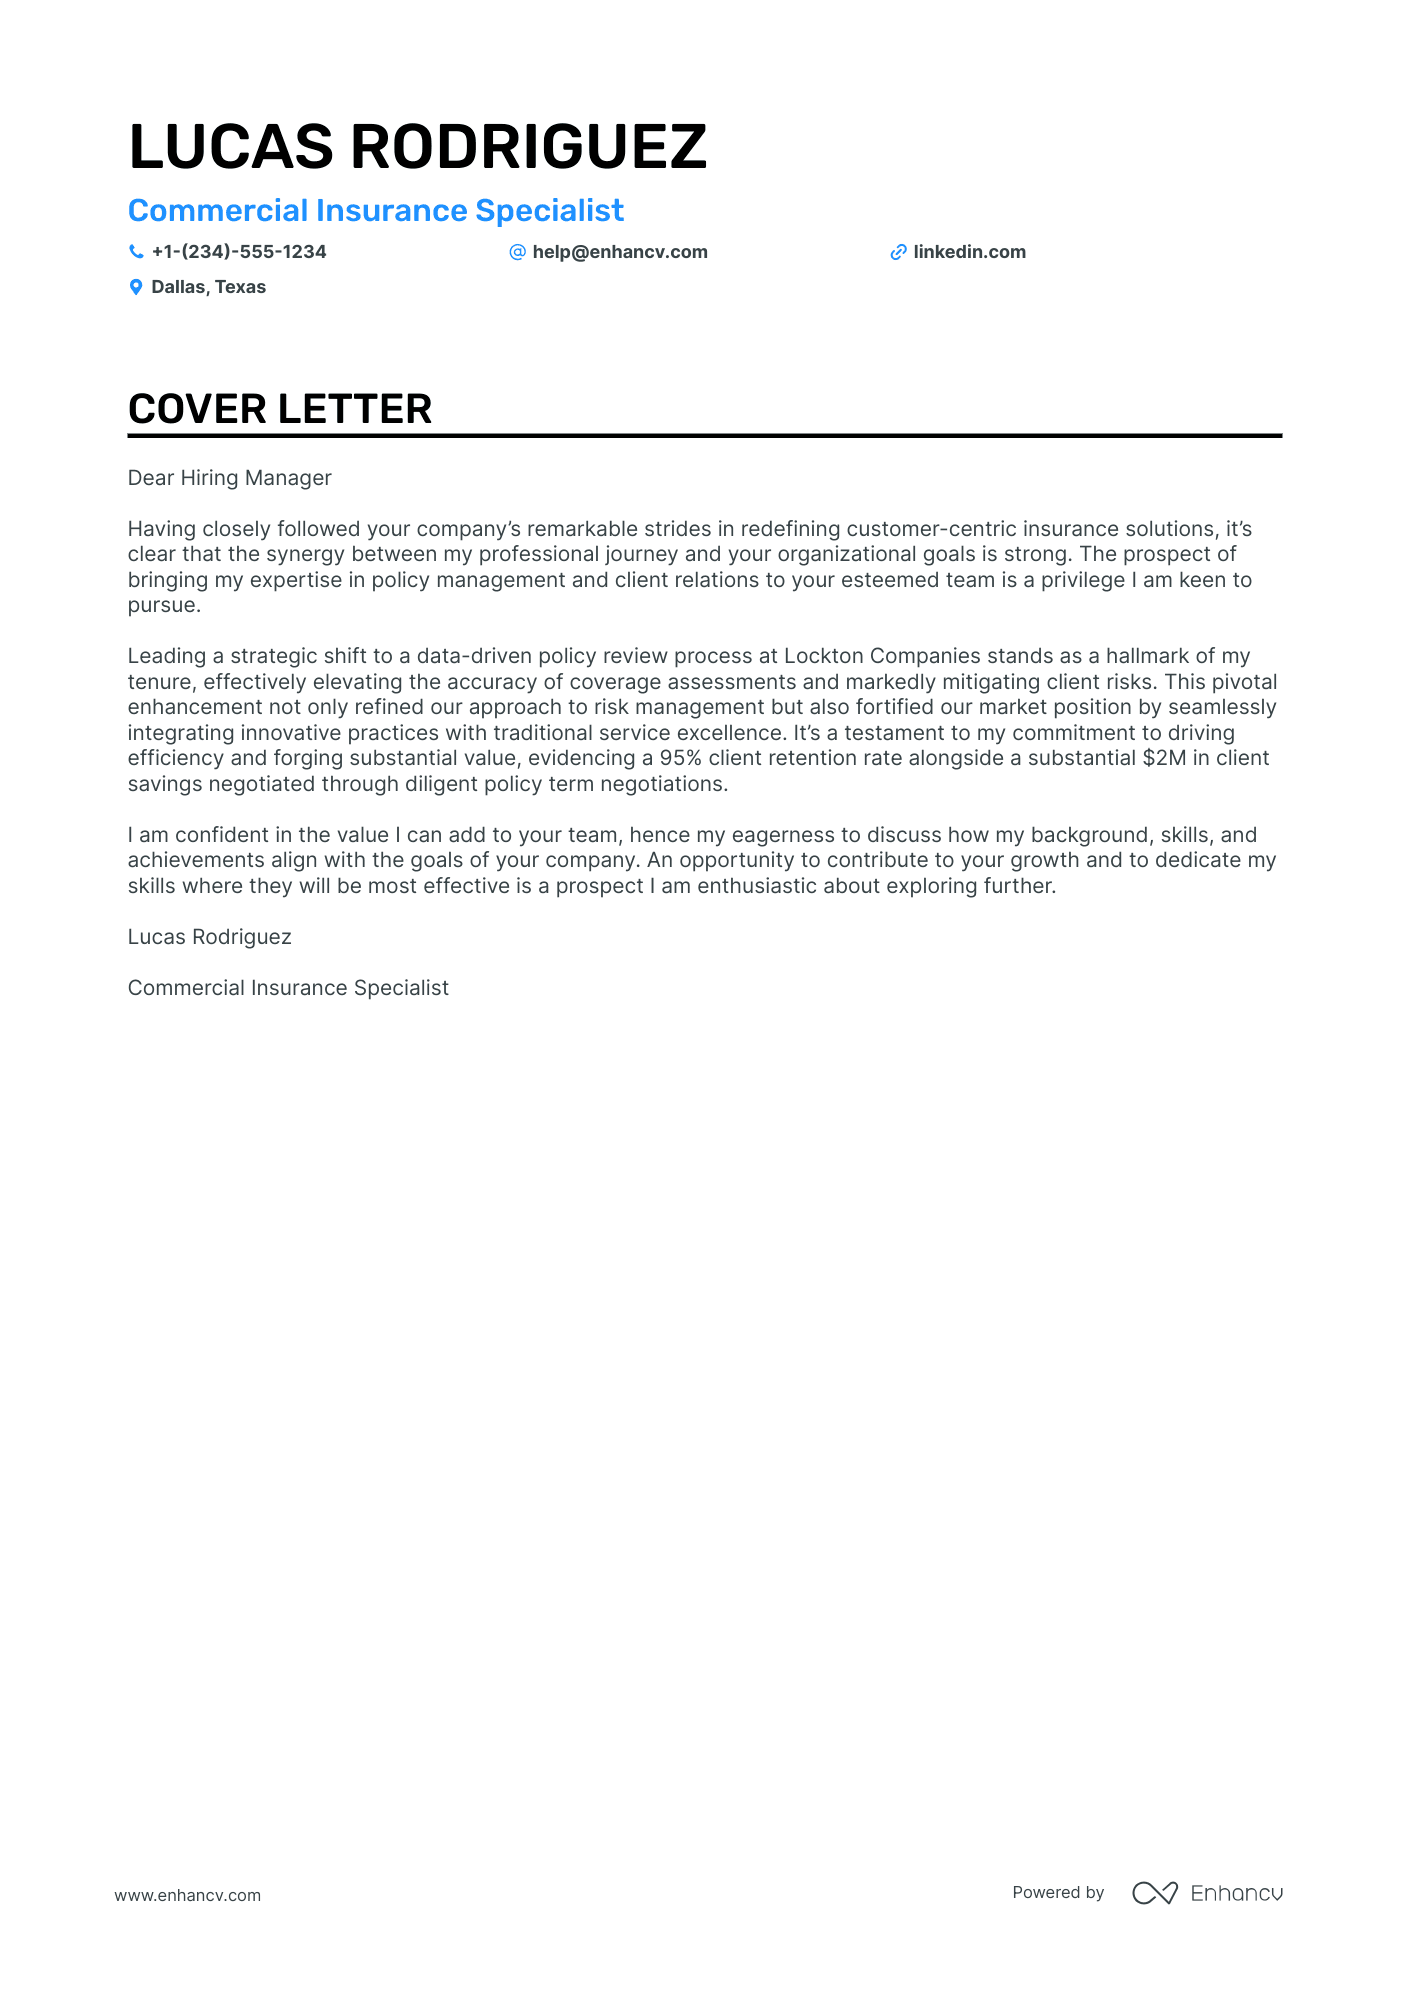 Client Service Manager cover letter